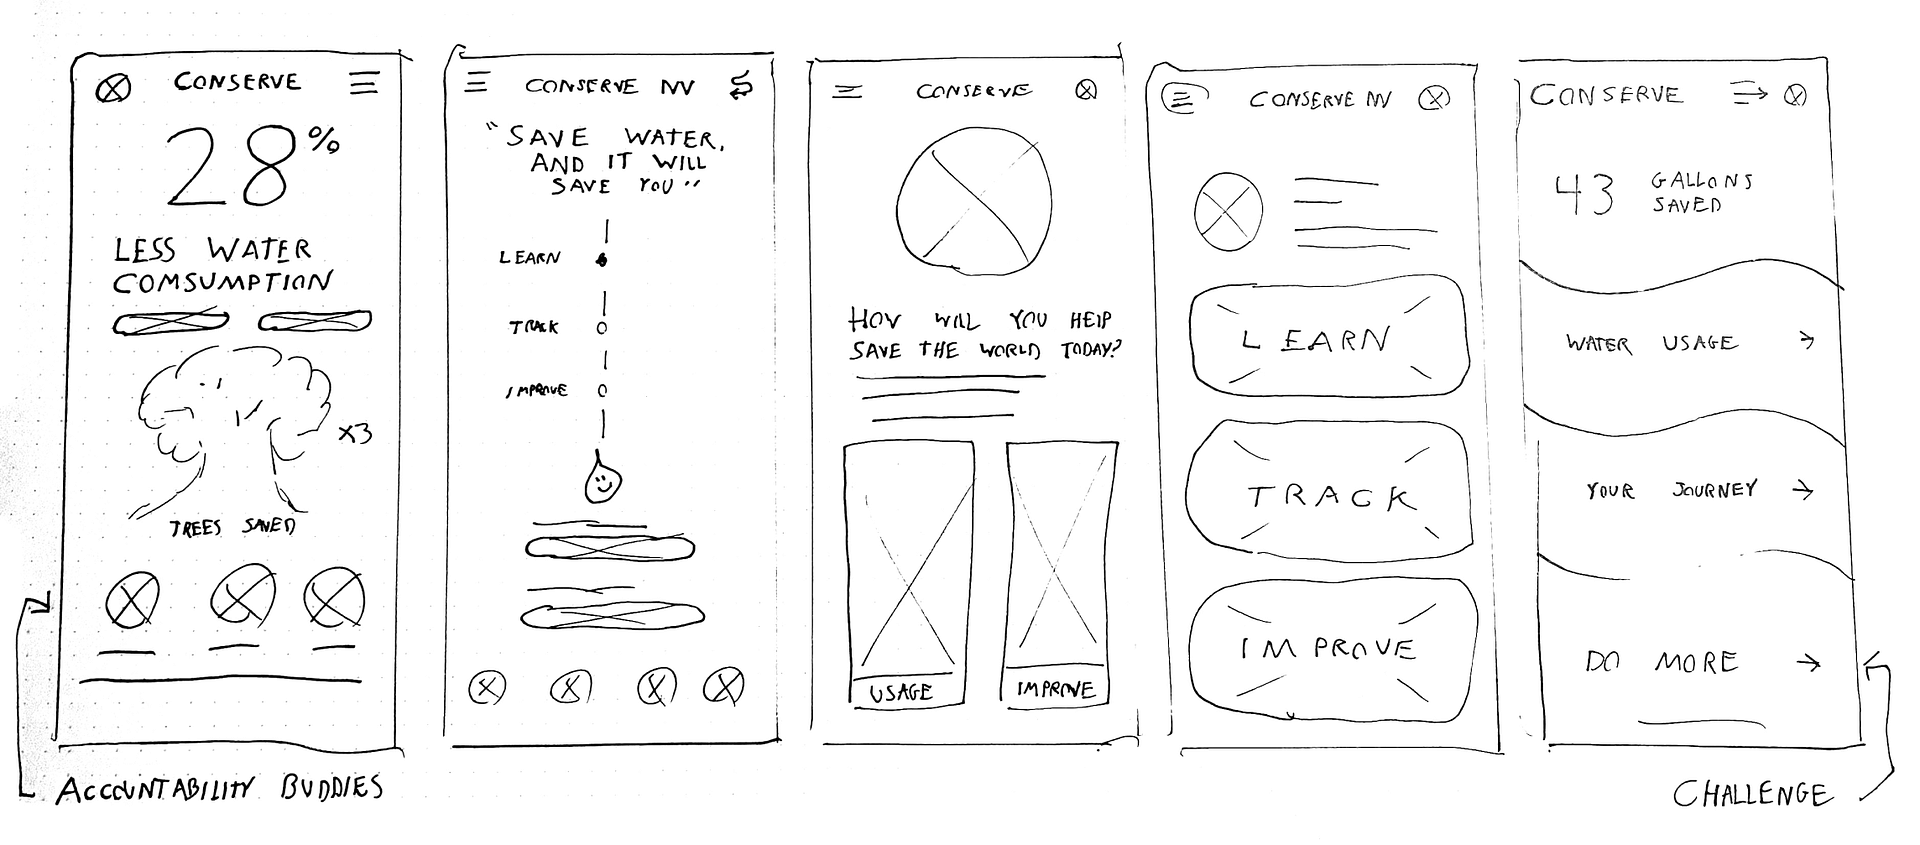 Conserve_Wireframes2-2-1